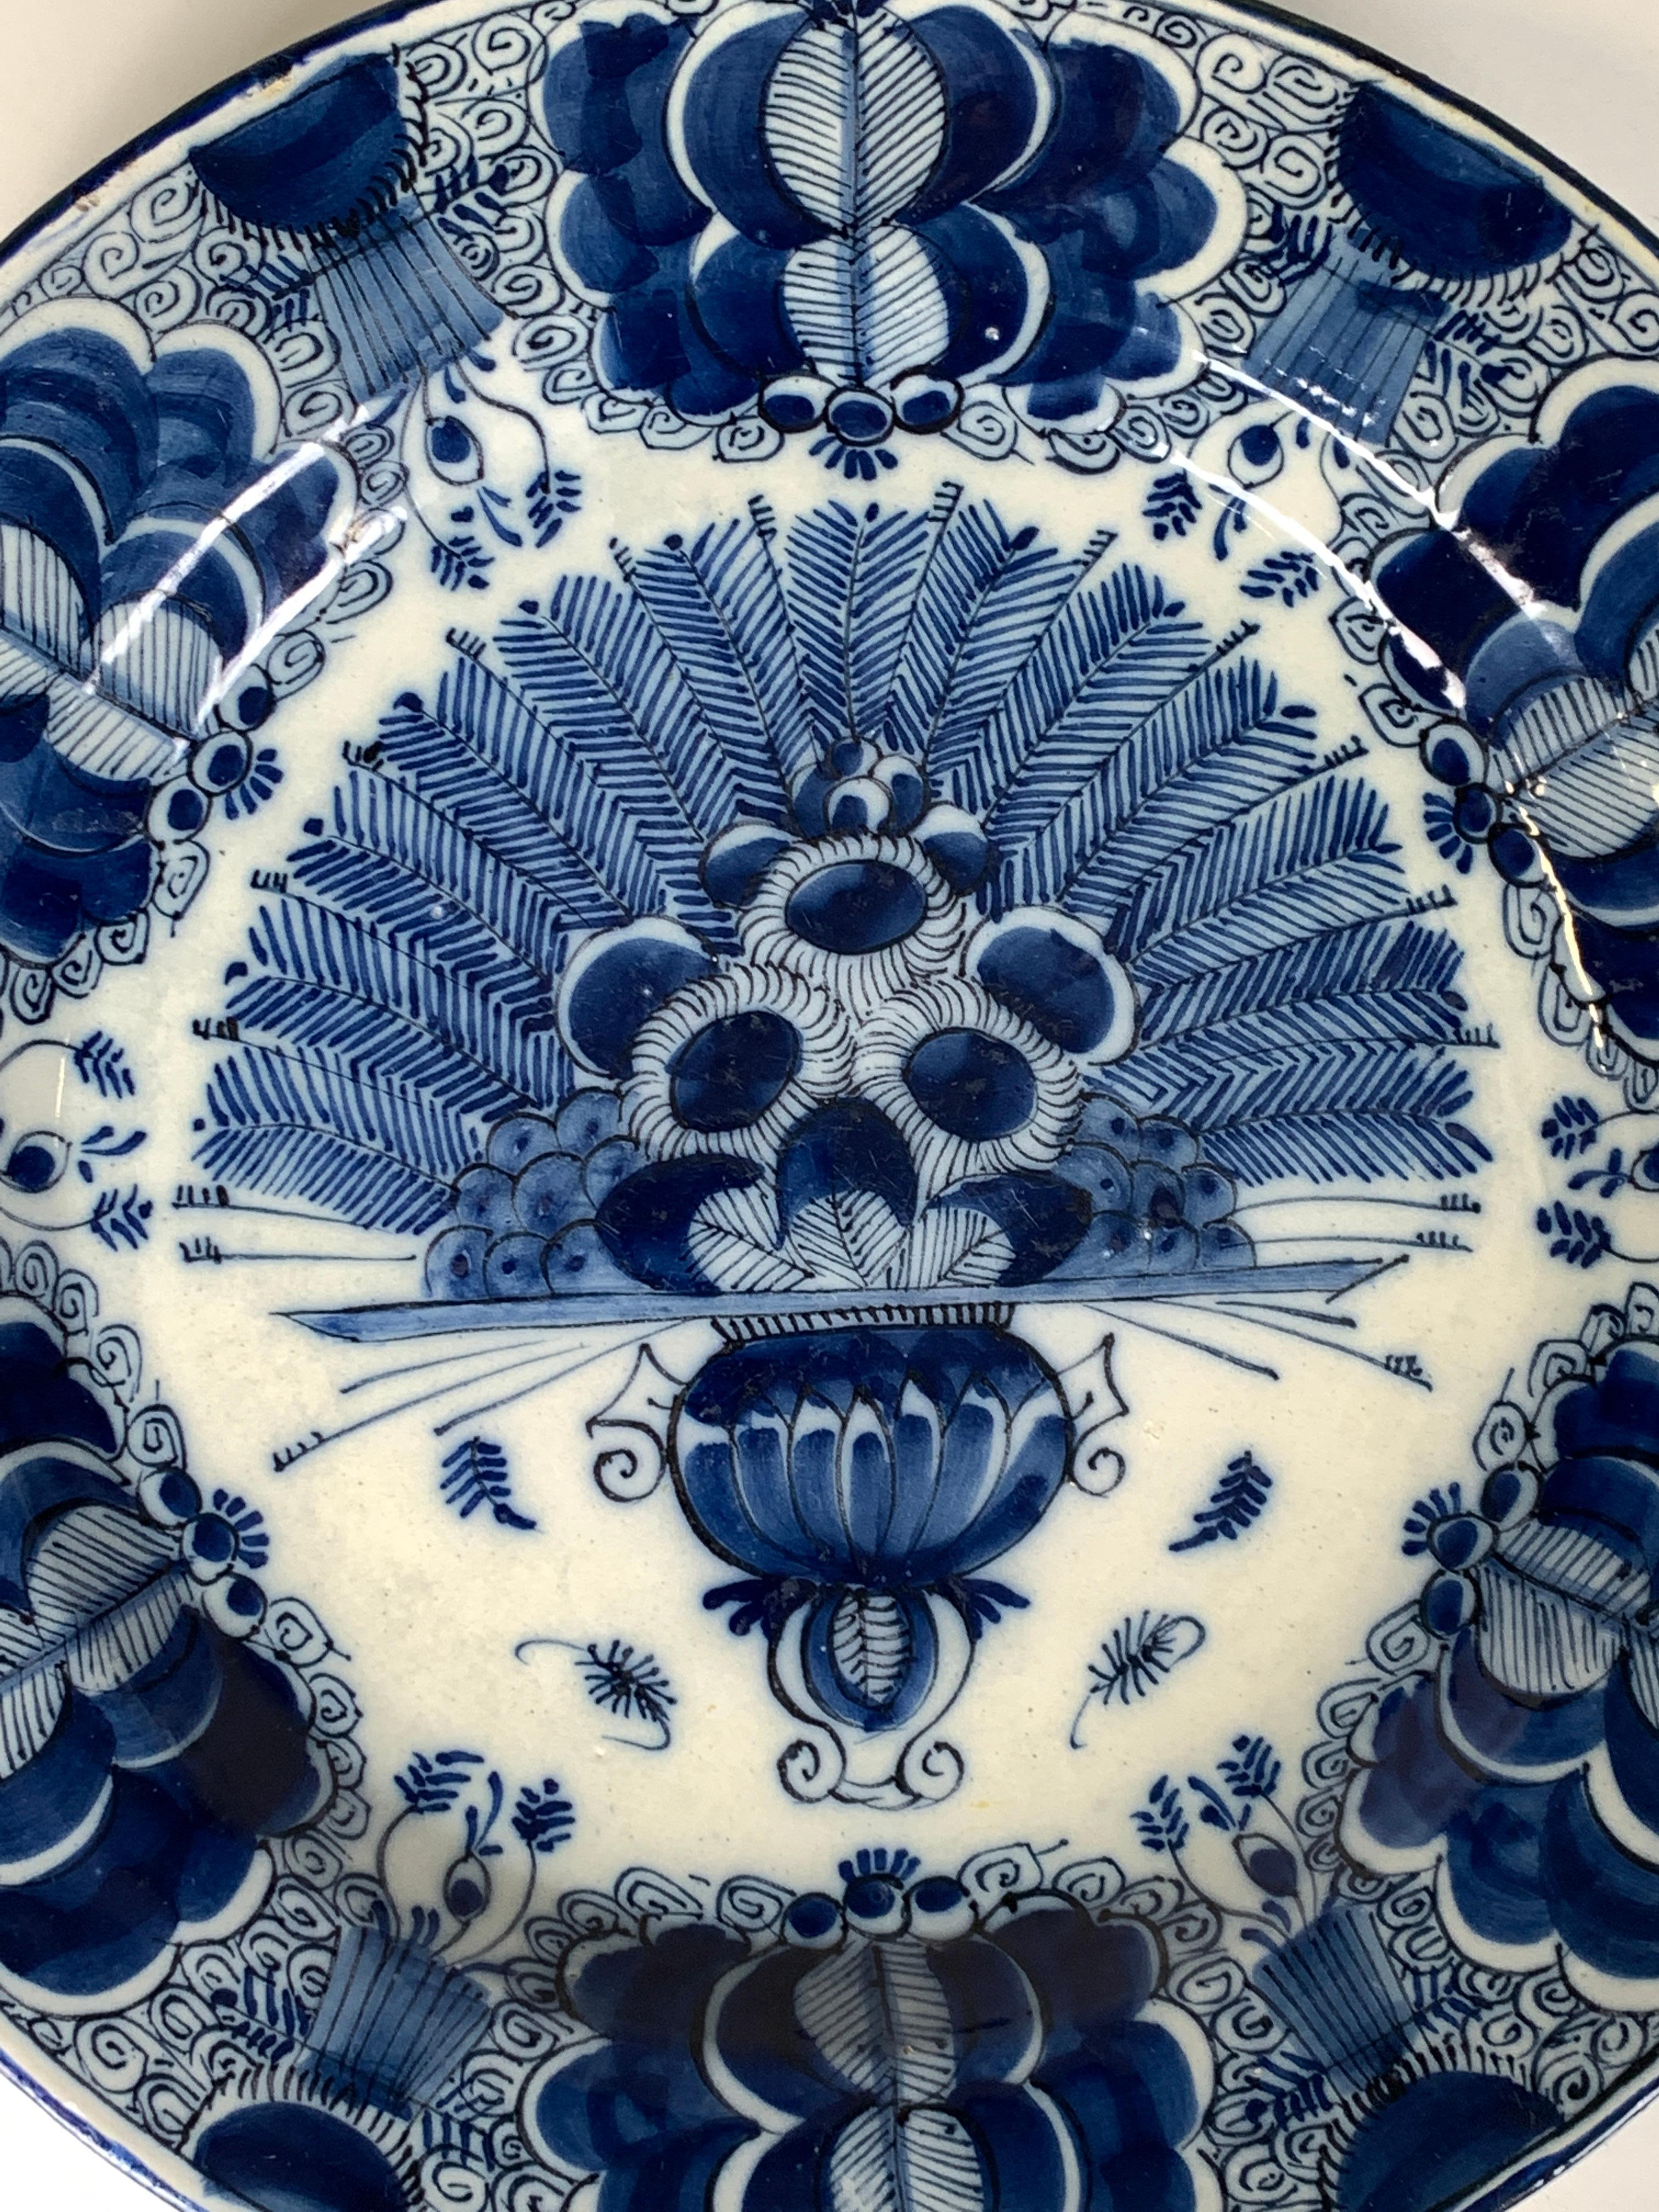 Why we love it: The intense cobalt blue
We are pleased to offer this sizeable Dutch Delft blue and white charger hand-painted in deep cobalt blue. This exquisite charger was made in the 18th century, circa 1780. It shows a vase filled with